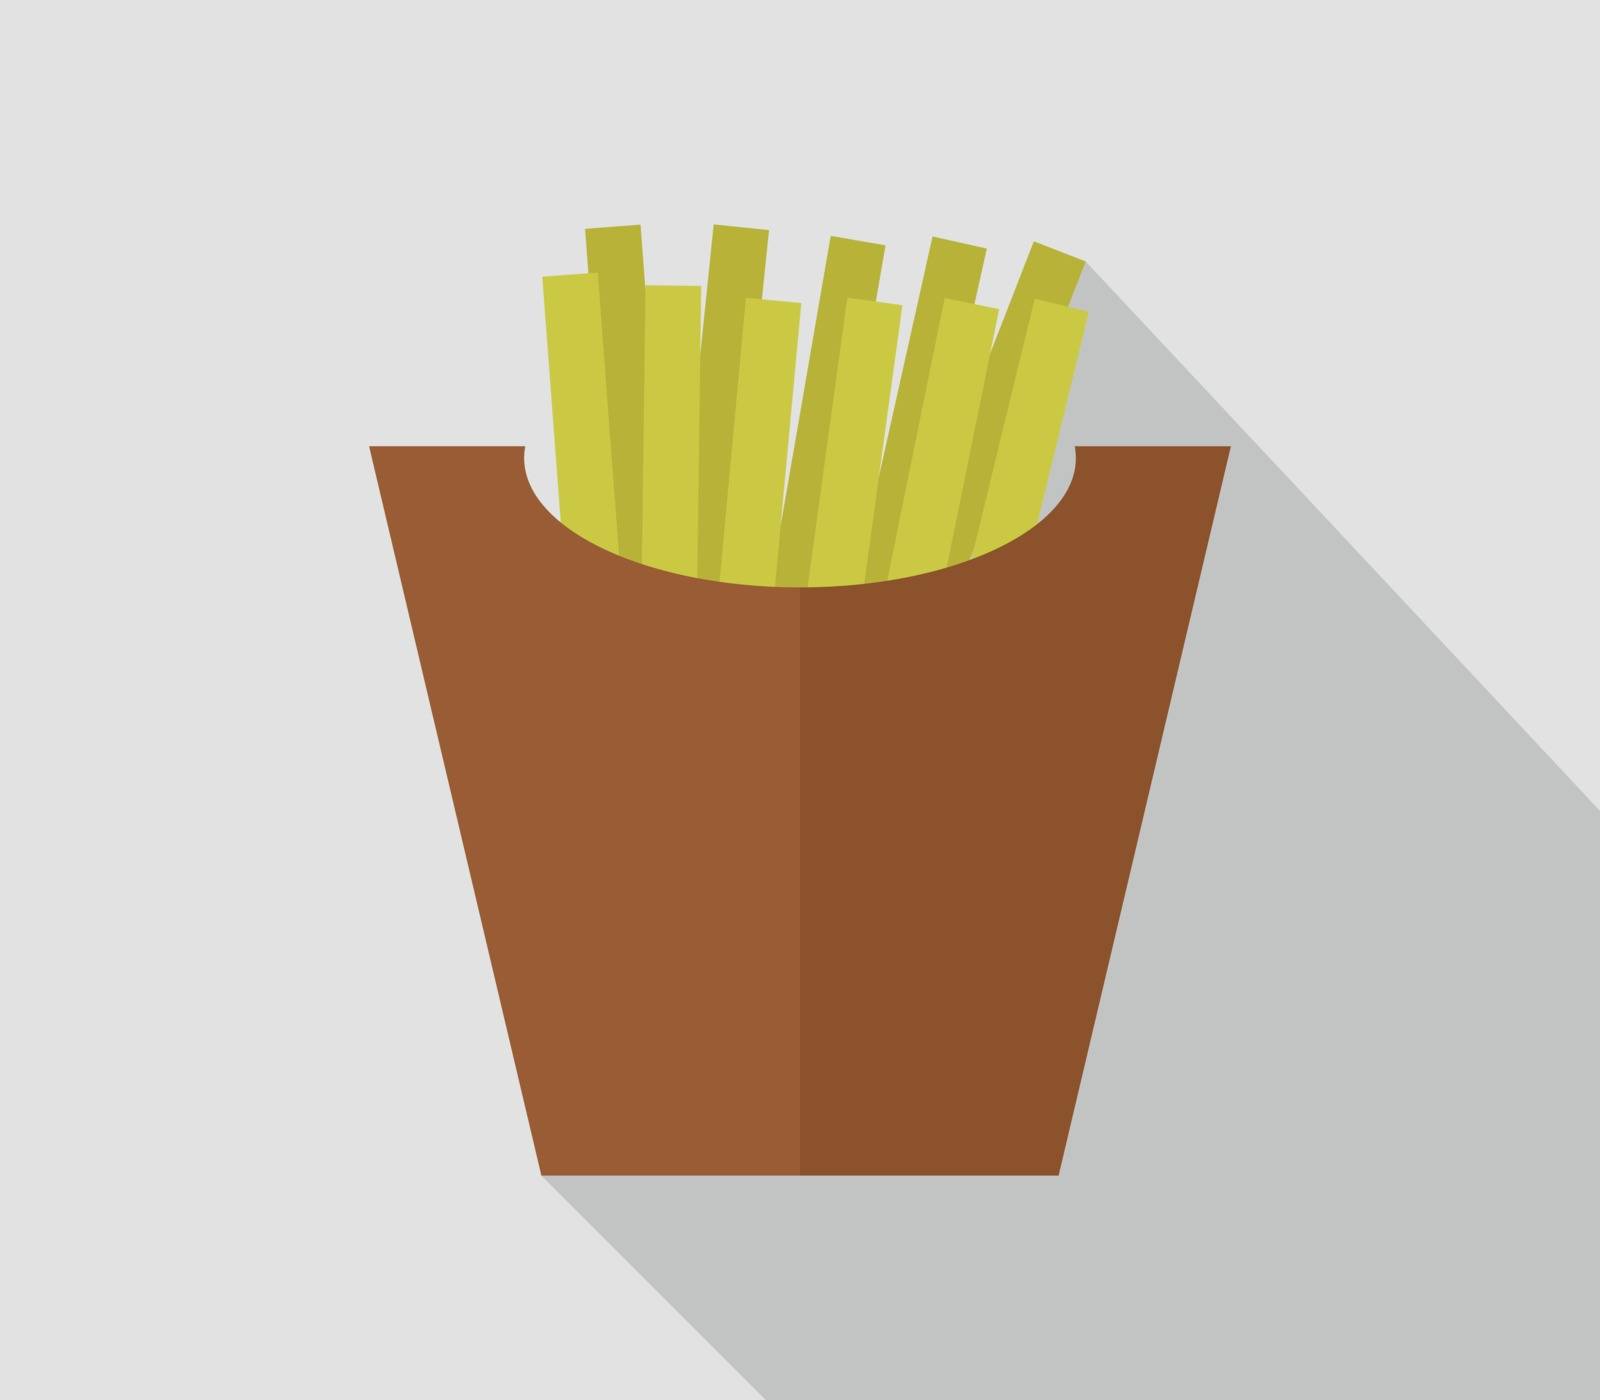 potato chips icon by Mark1987